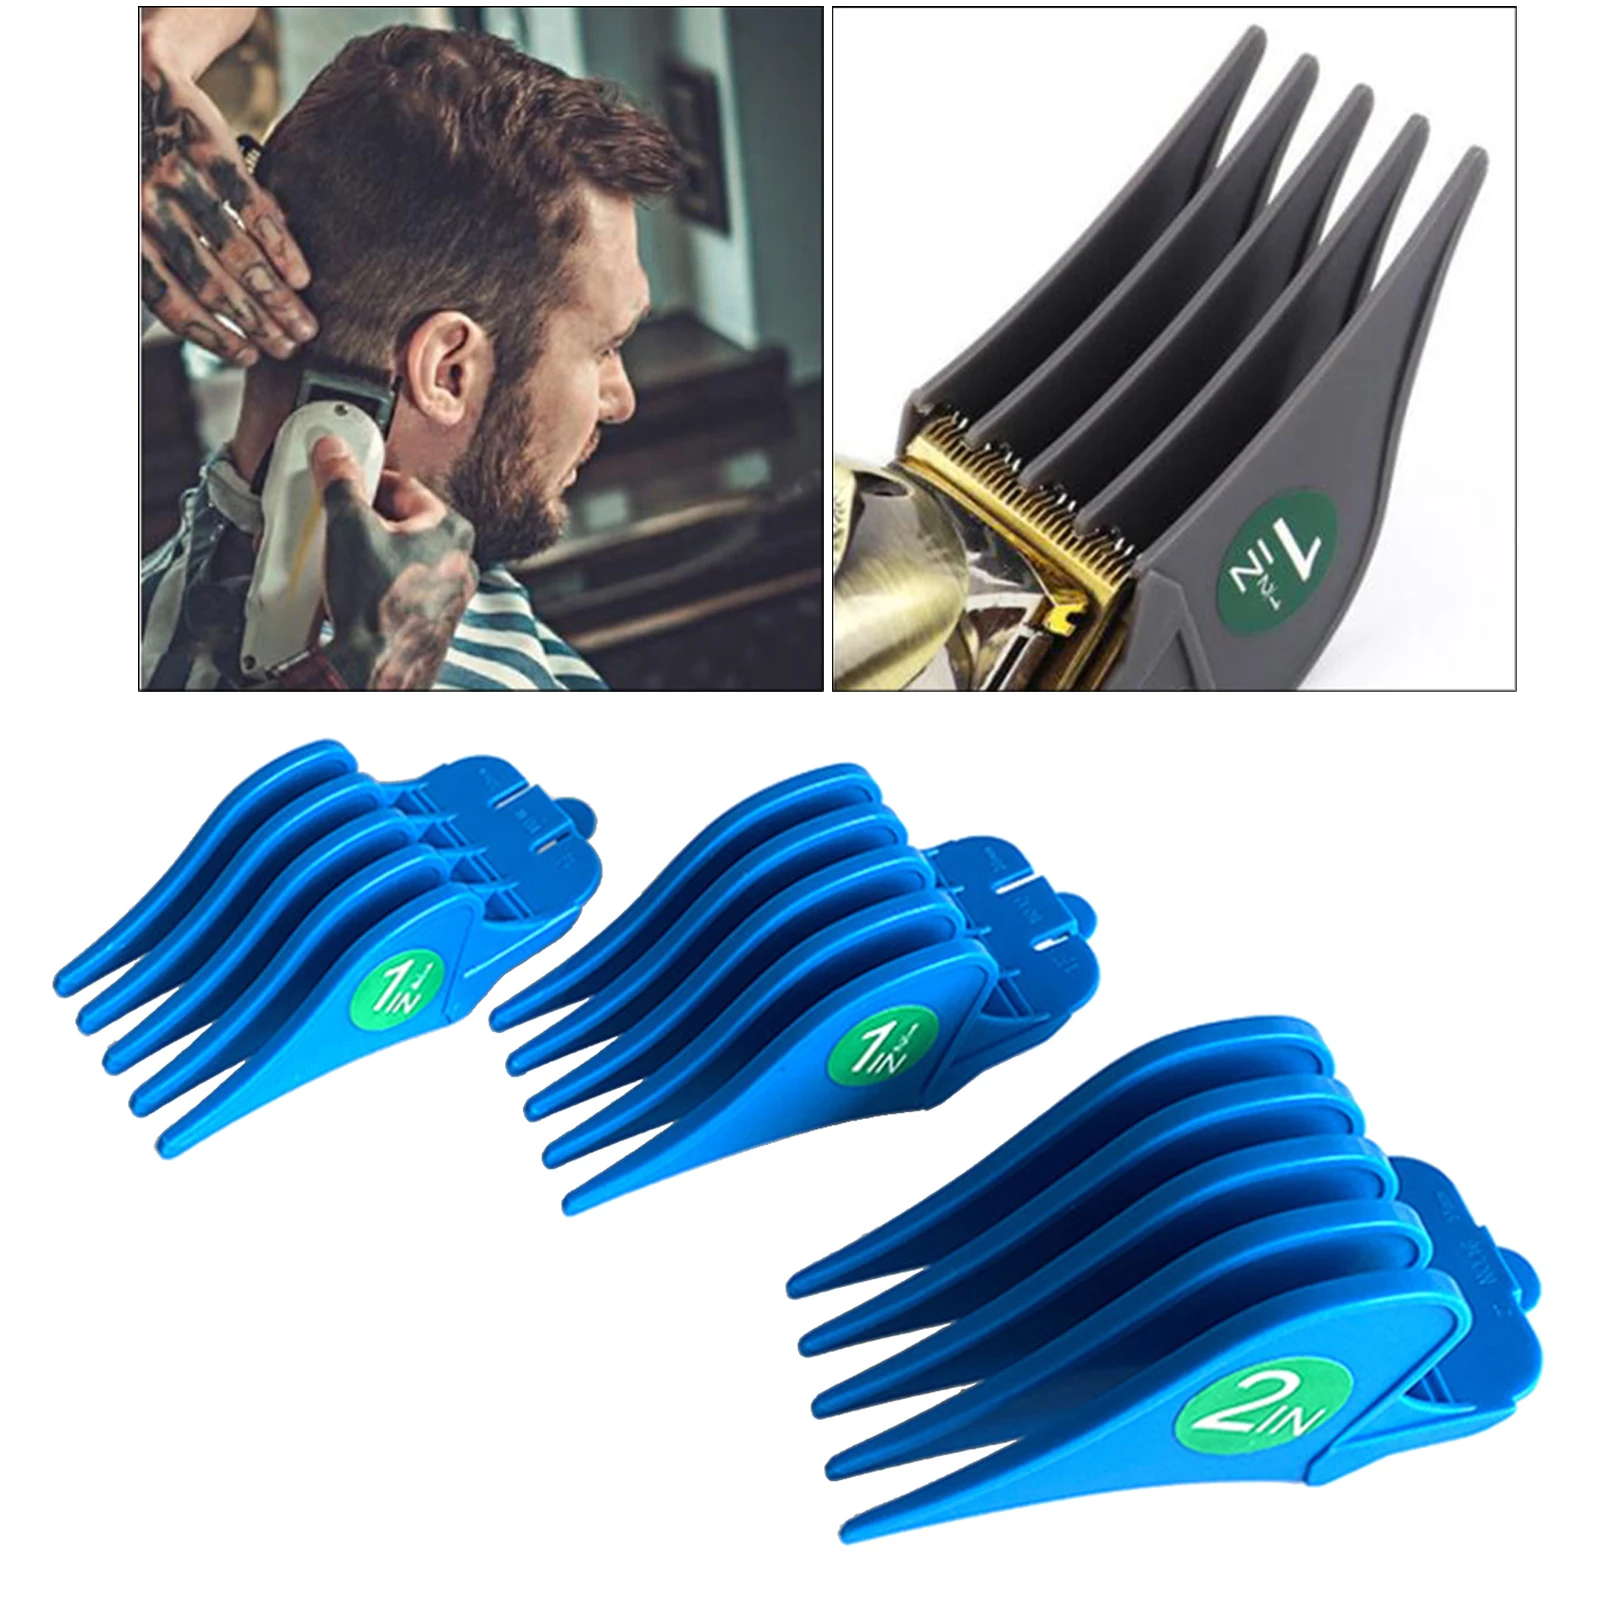 3pcs Professional Hair Clipper Guide Combs 32mm 38mm 51mm Cutting Guides Attachment